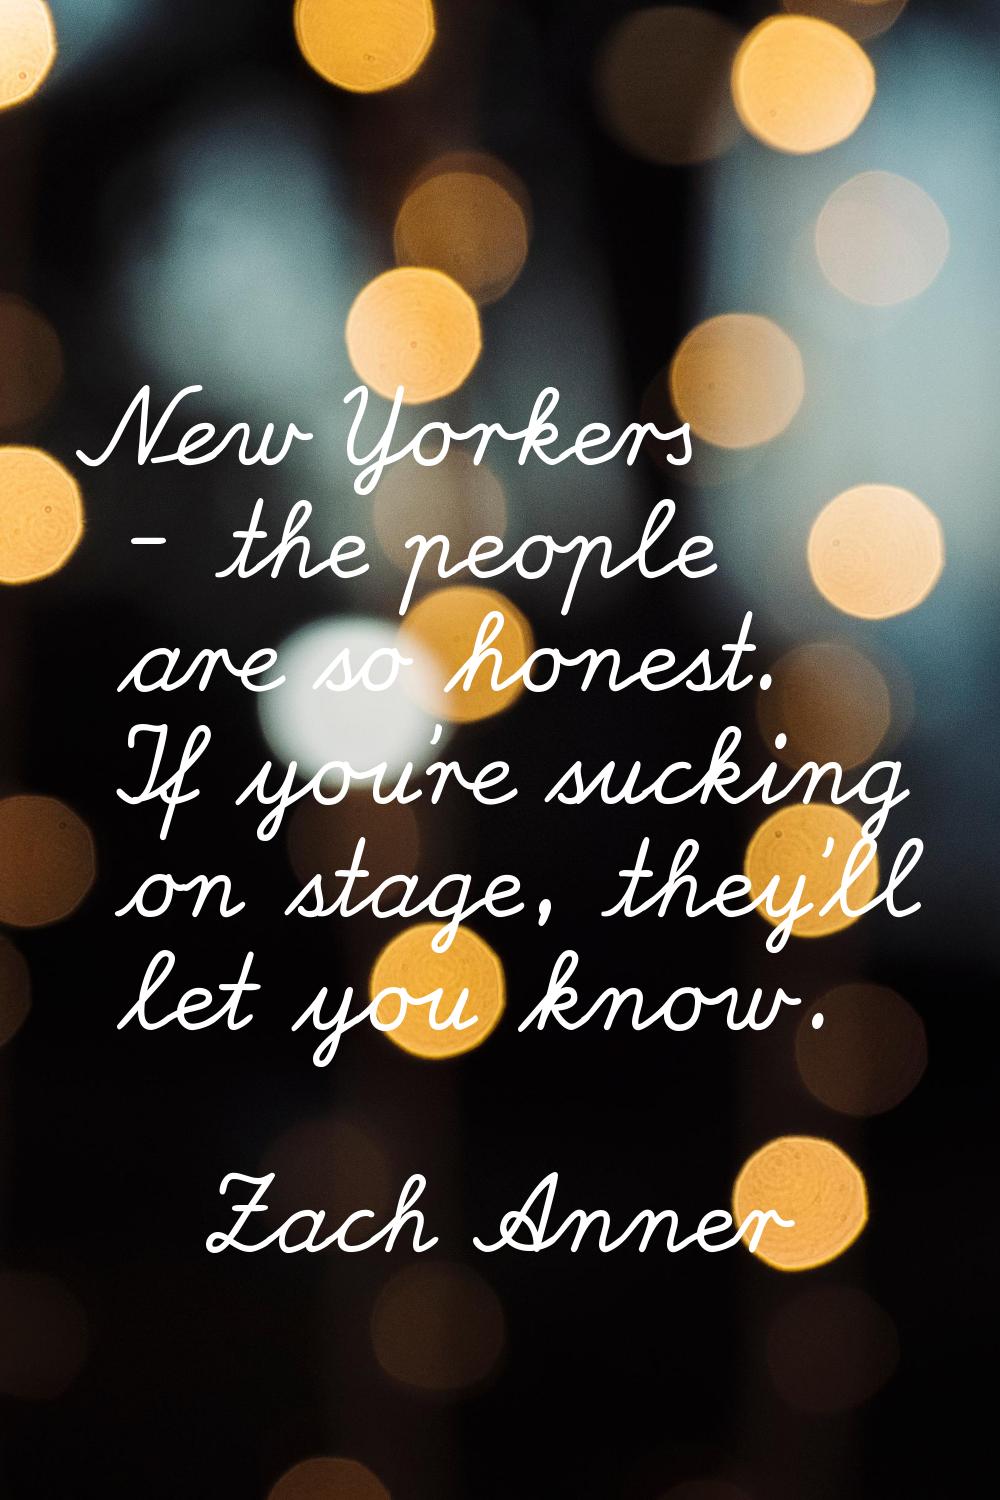 New Yorkers - the people are so honest. If you're sucking on stage, they'll let you know.